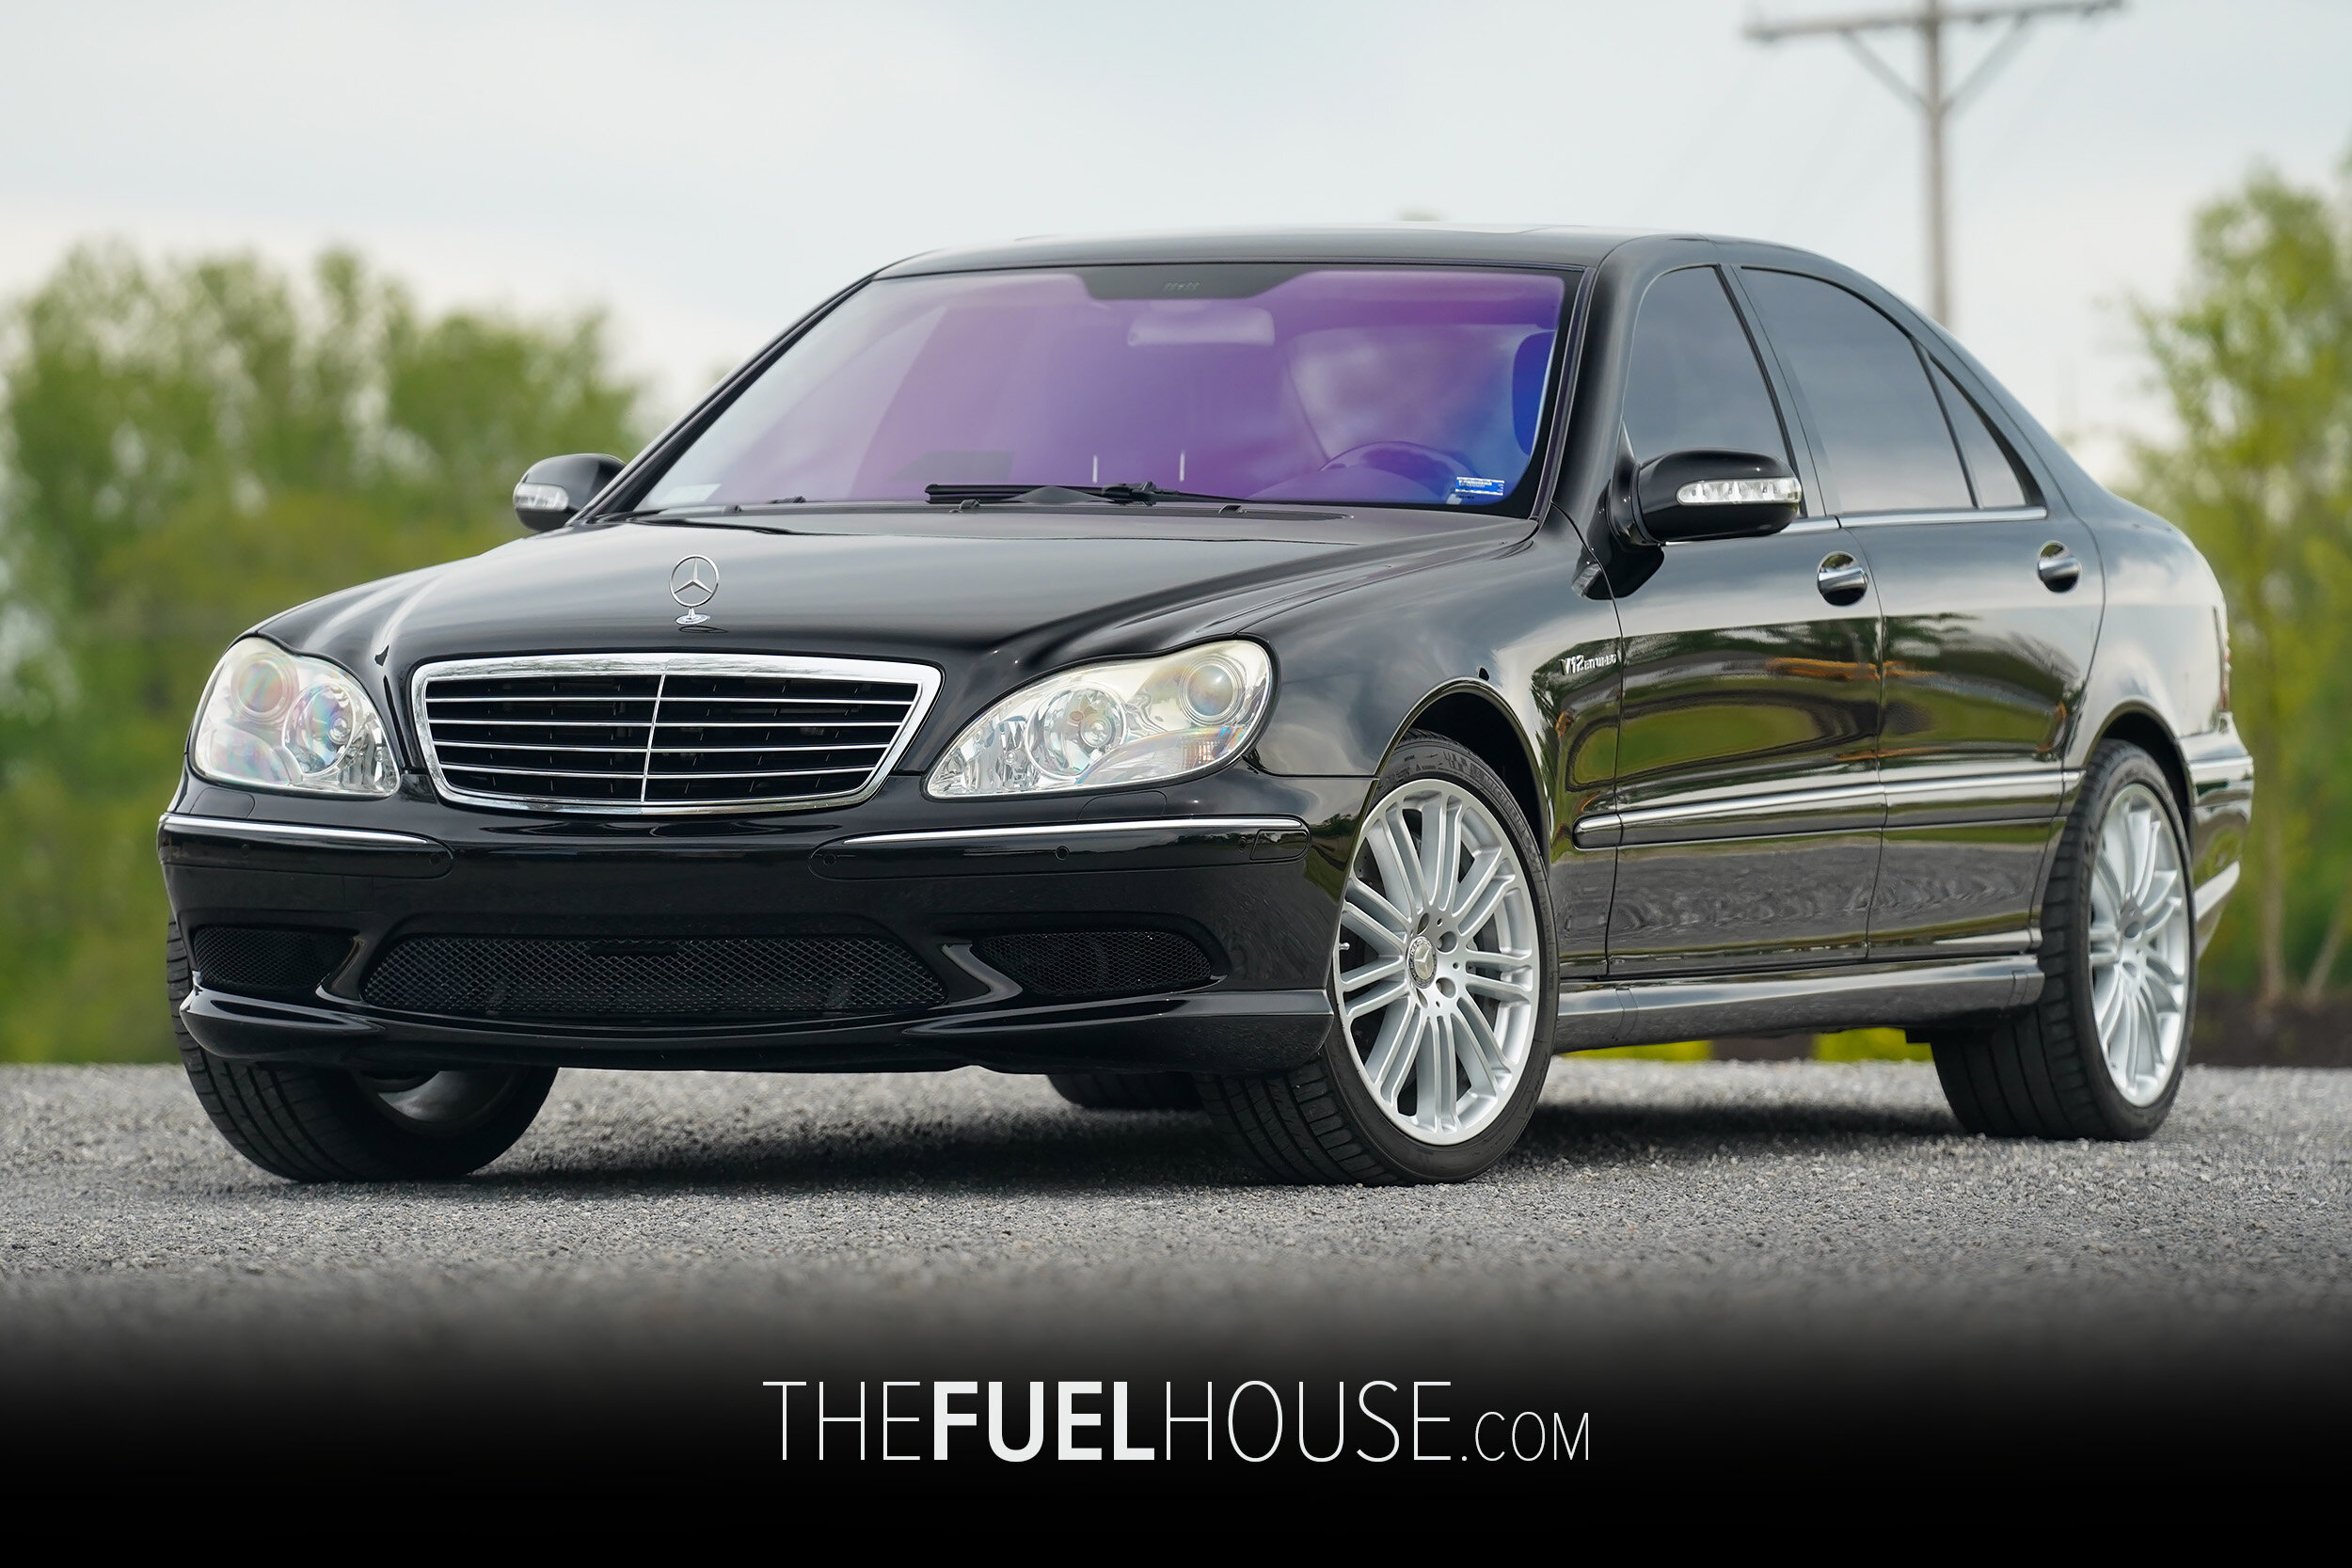 2006 Mercedes Benz S Class Amg S65 V12 Biturbo For Sale The Fuel House